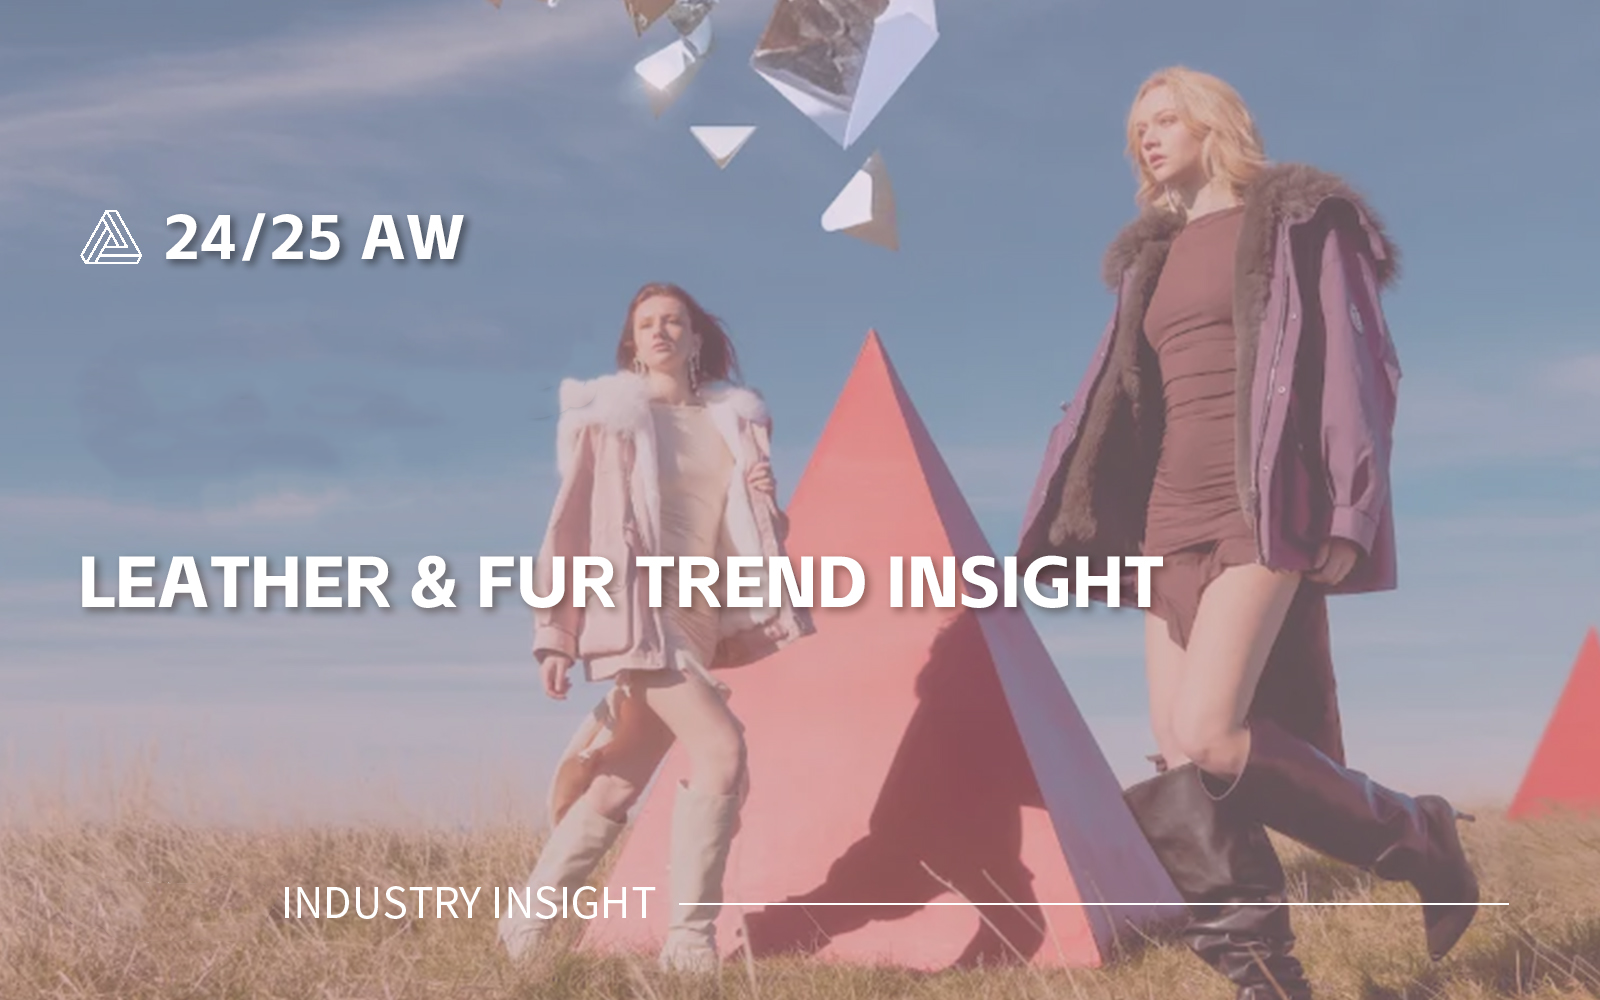 A/W 24/25 Trend Insight of Leather & Fur